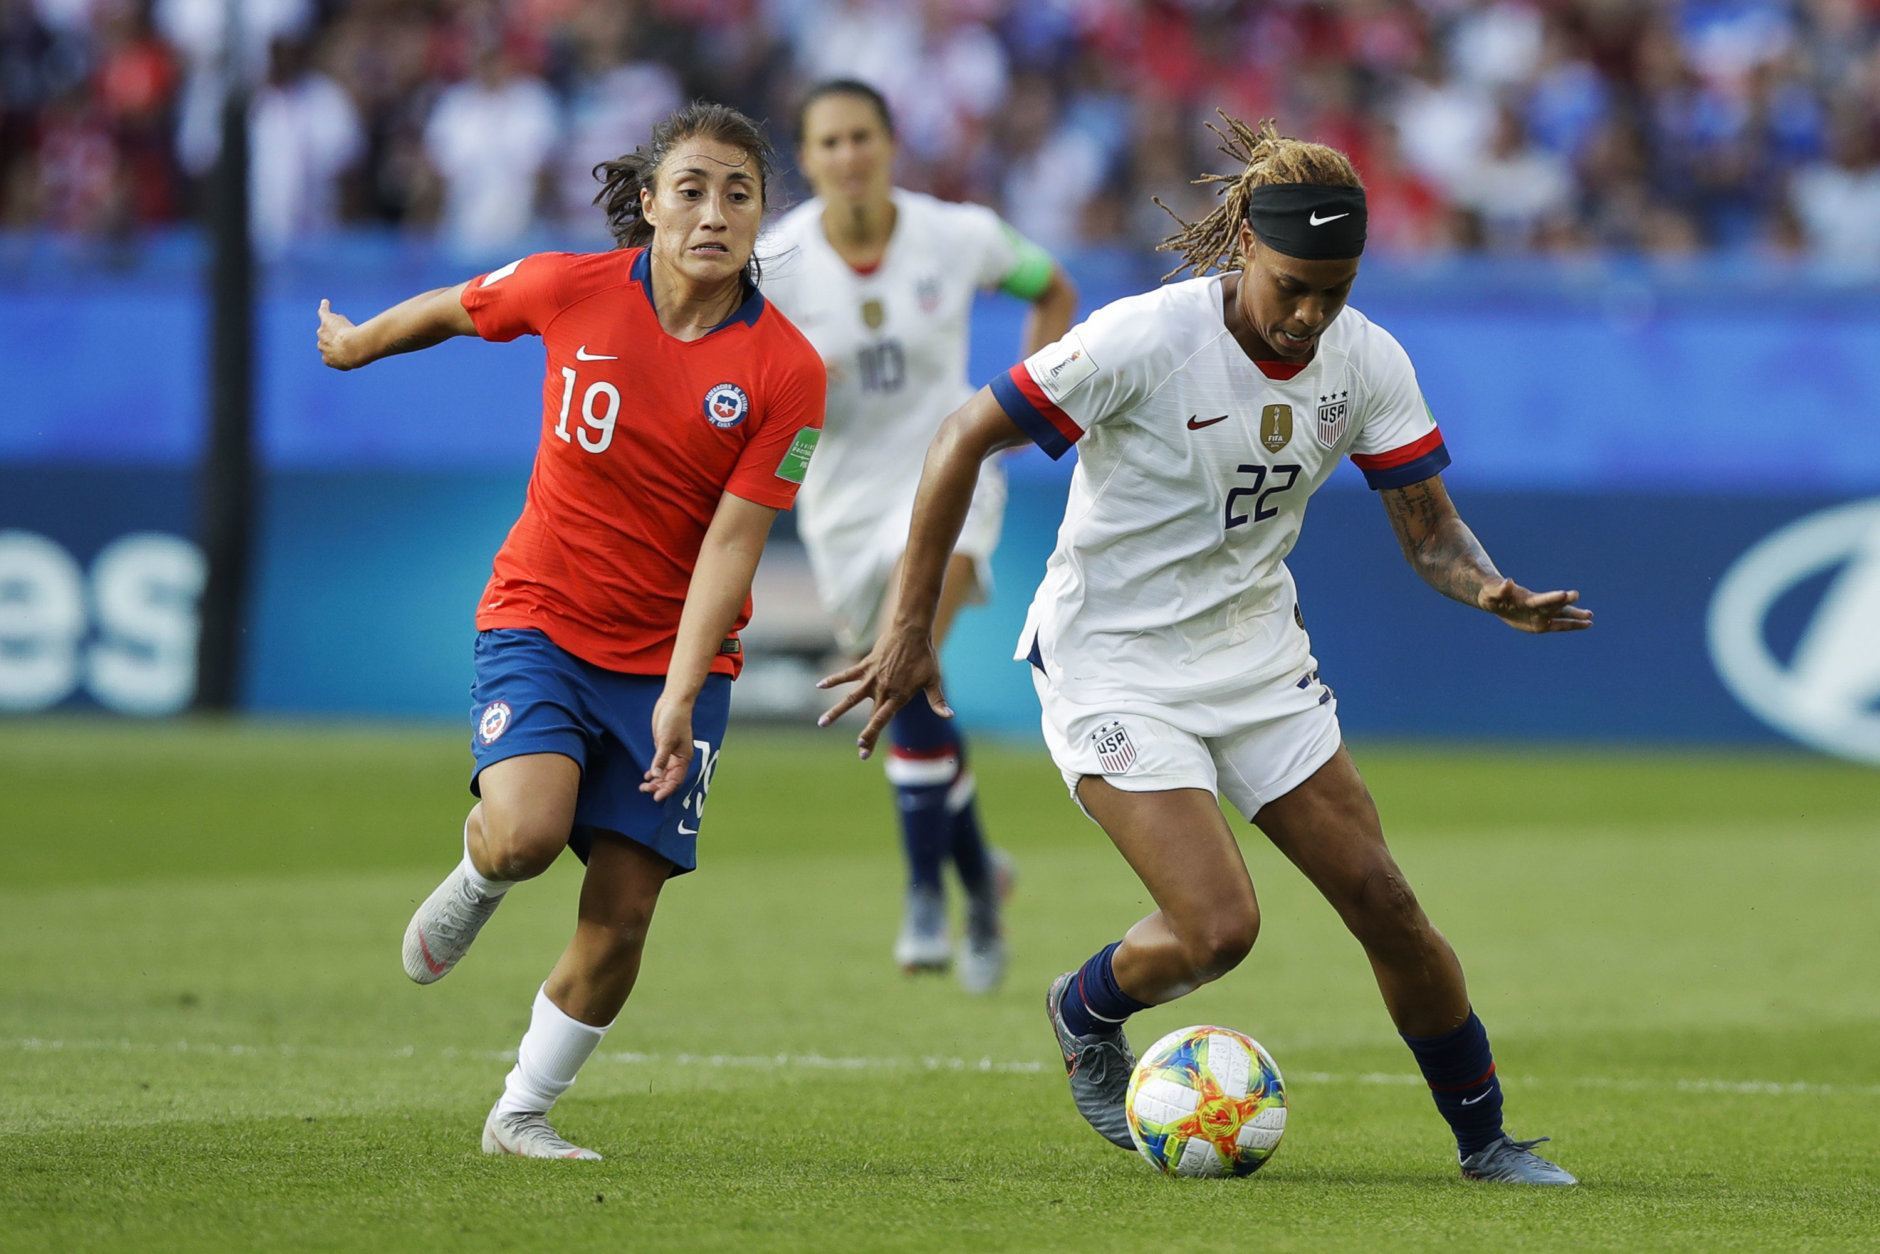 United States' Jessica Mcdonald, right, vies for the ball with Chile's Yessenia Huenteo during the Women's World Cup Group F soccer match between United States and Chile at Parc des Princes in Paris, France, Sunday, June 16, 2019. (AP Photo/Alessandra Tarantino)